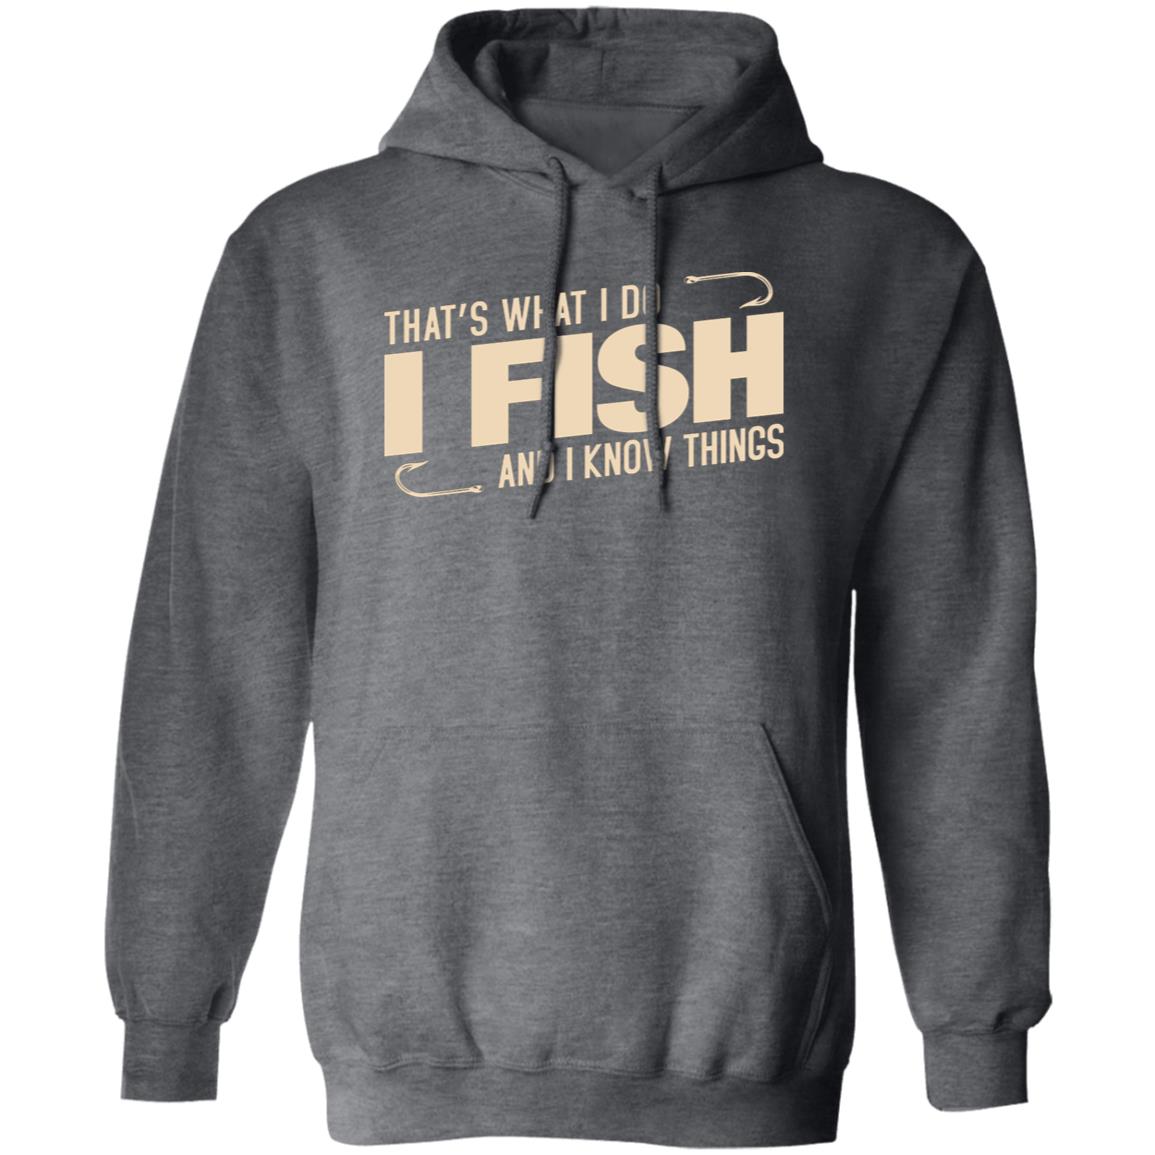 That's what I do I fish and I know things hoodie g dark-heather